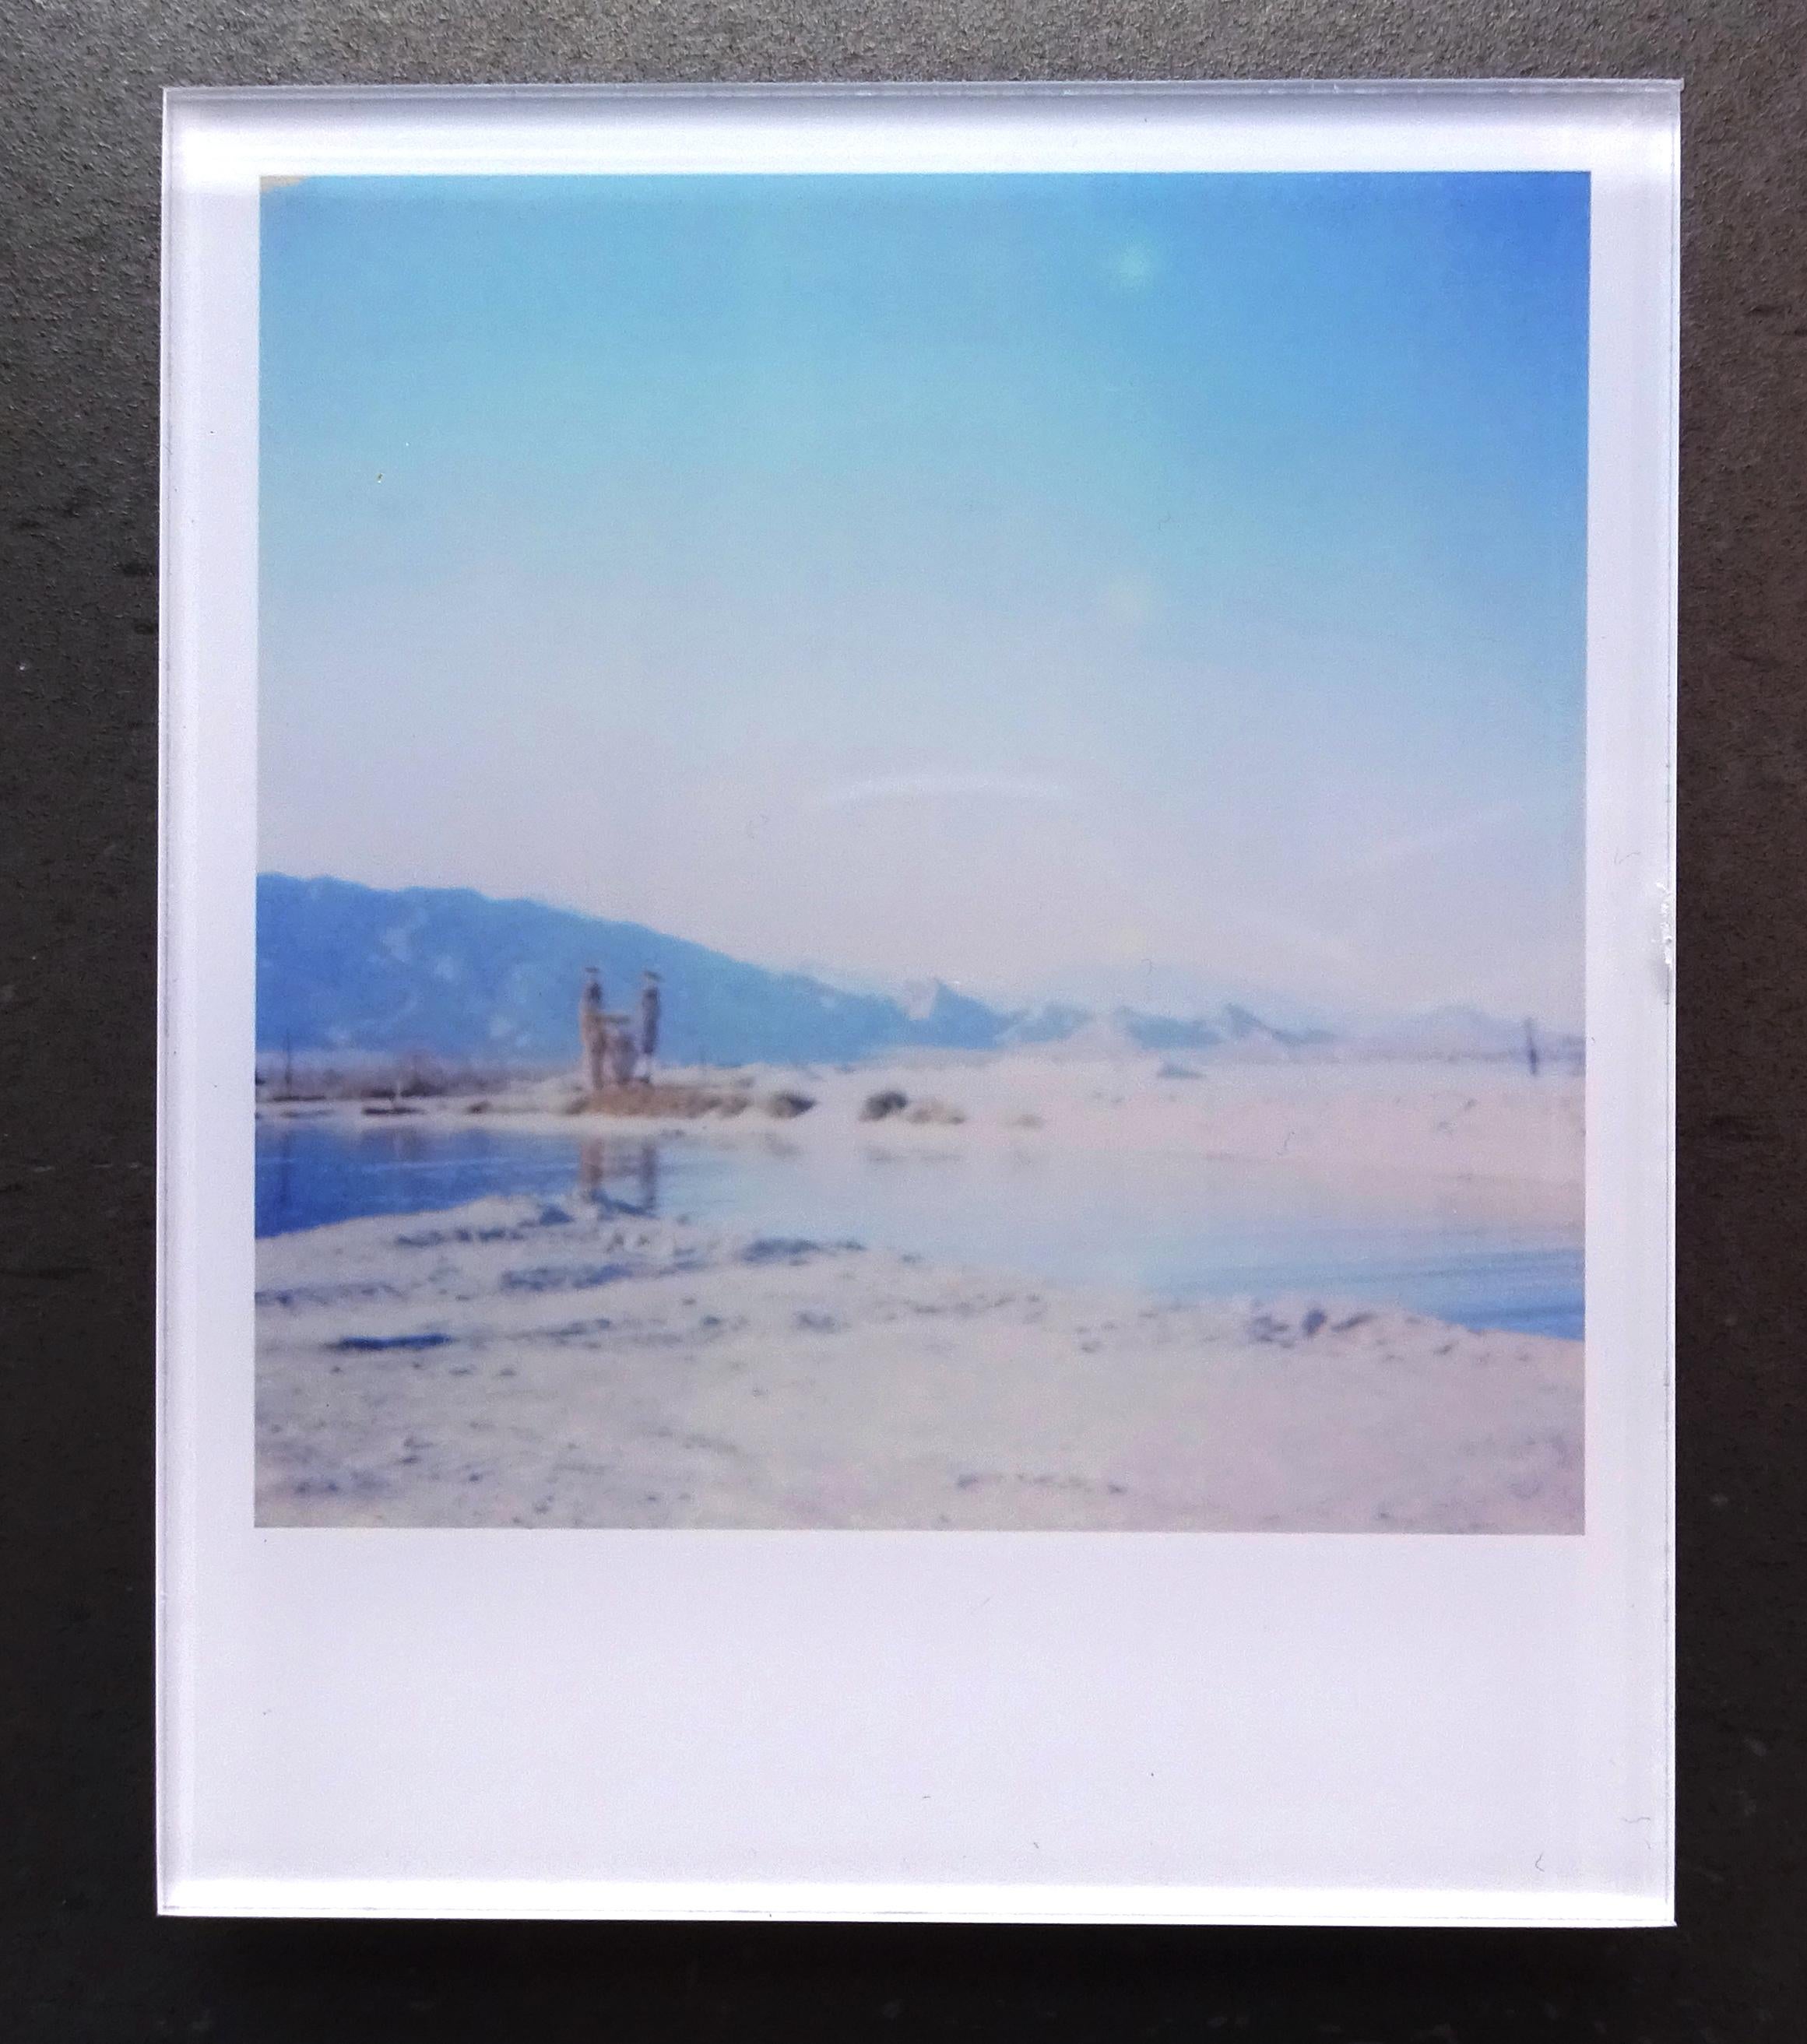 Stefanie Schneider's Minis - 
Desert Shores (California Badlands), 2010

Signed and signature brand on verso.
Lambda digital Color Photographs based on the Polaroid.
Sandwiched in between Plexiglass (thickness 0.7cm)

Polaroid sized open Editions